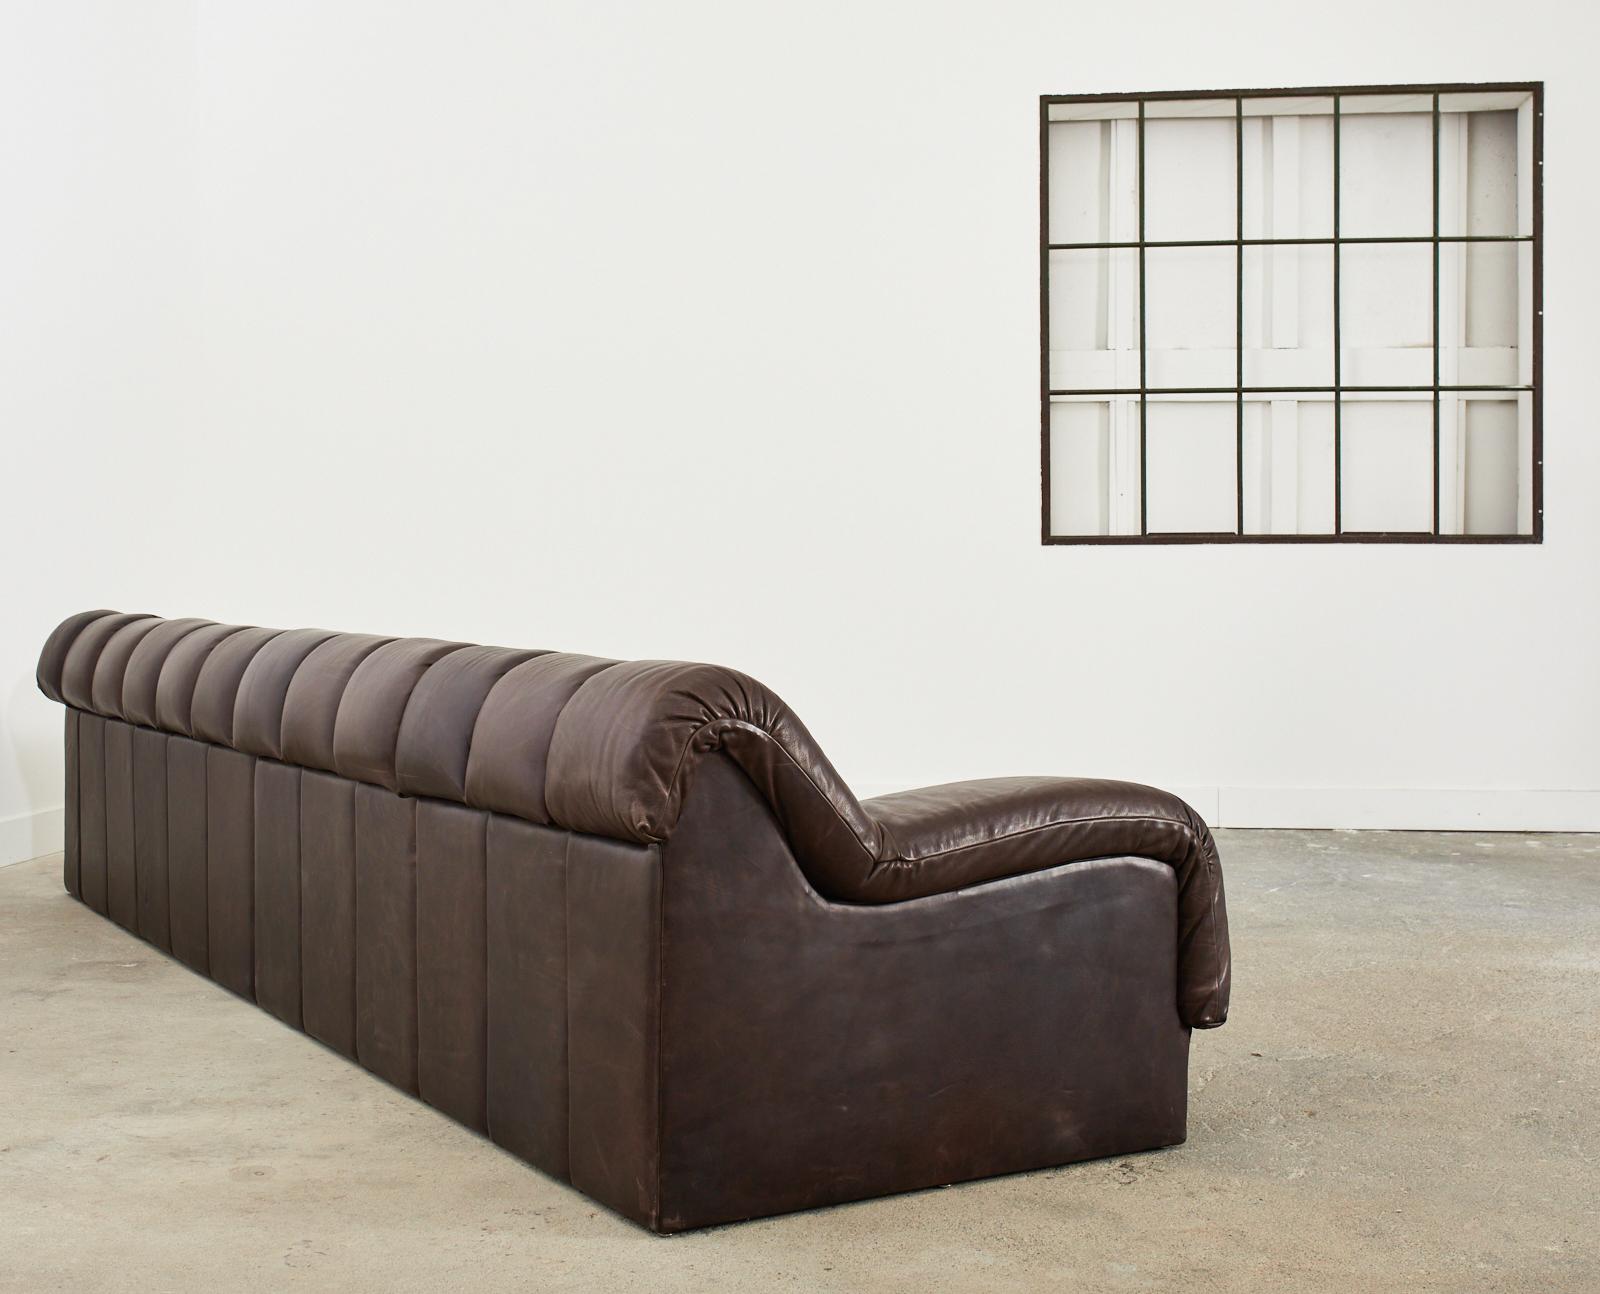 Monumental Steve Chase Monterey Style Channeled Leather Sofa 12